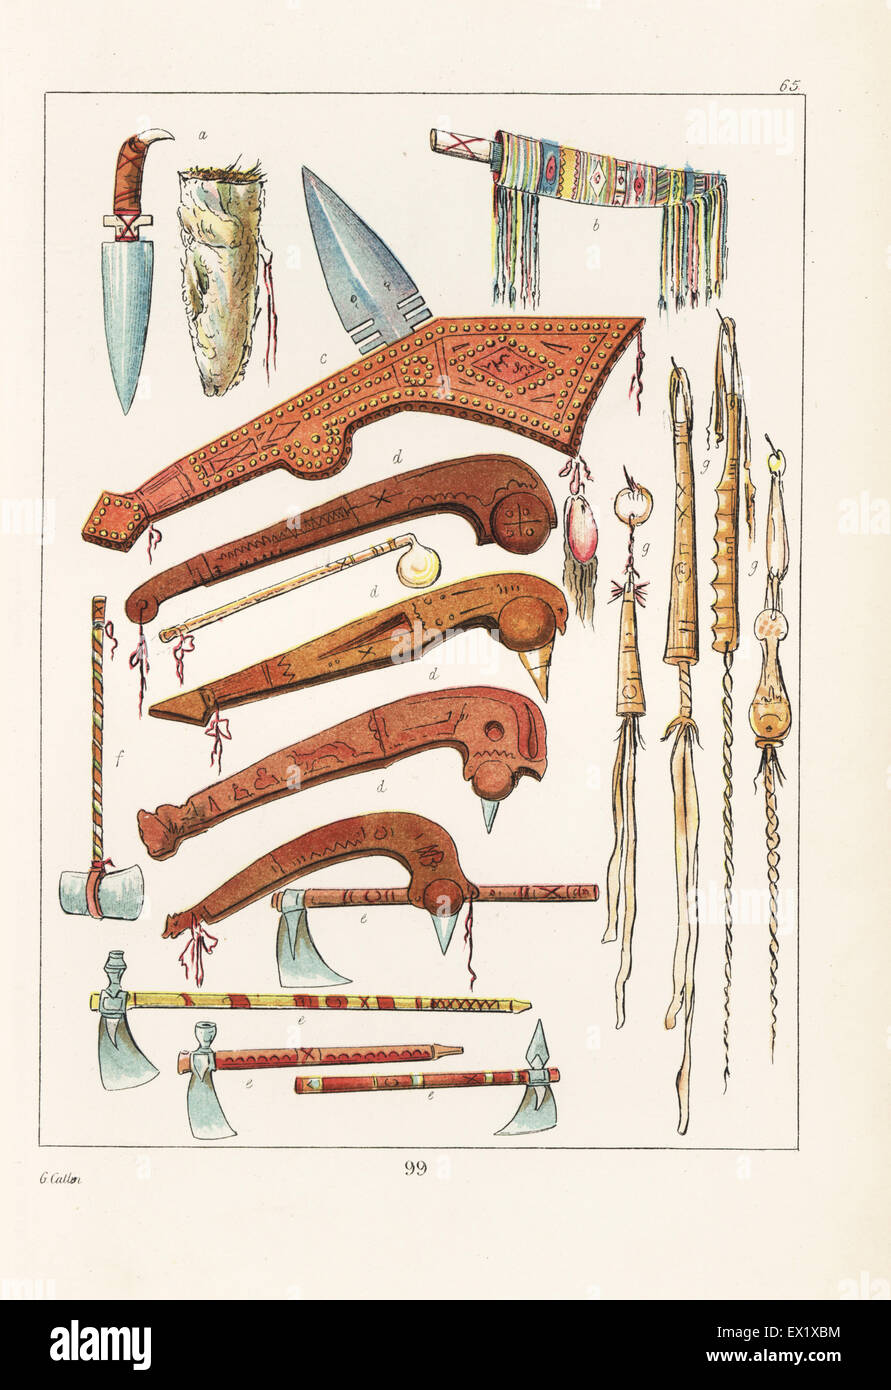 Weapons of the Native Americans: scalping knives and scabbards a,b, war clubs c, clubs d tomahawks and pipe tomahawks e, hatchet f and horse whips g. Handcoloured lithograph from George Catlin's Manners, Customs and Condition of the North American Indians, London, 1841. Stock Photo